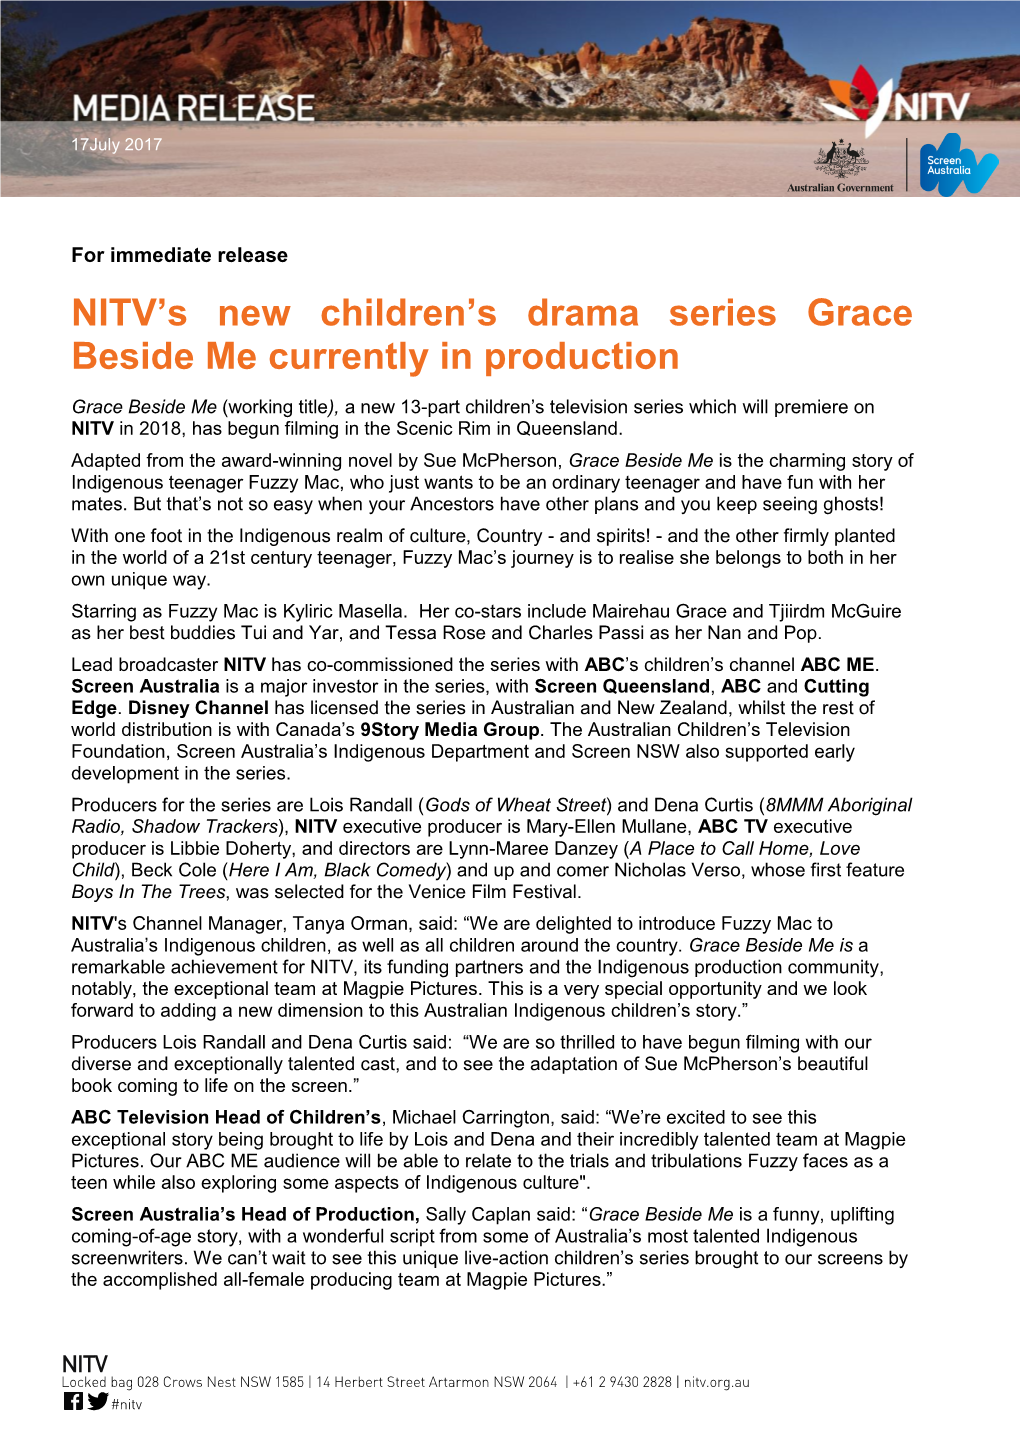 NITV's New Children's Drama Series Grace Beside Me Currently In